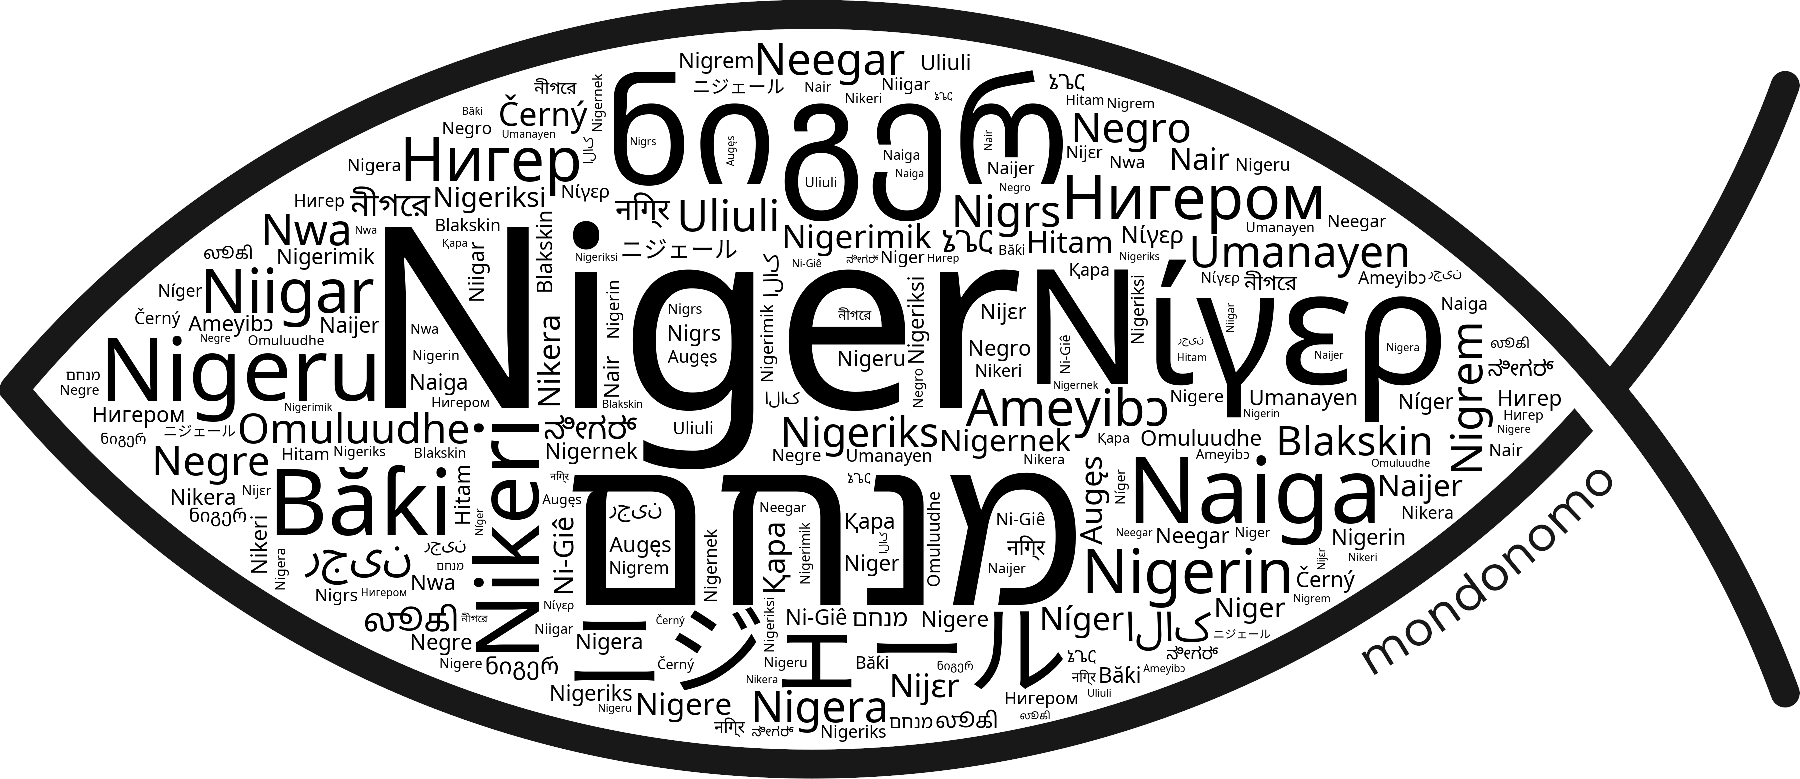 Name Niger in the world's Bibles